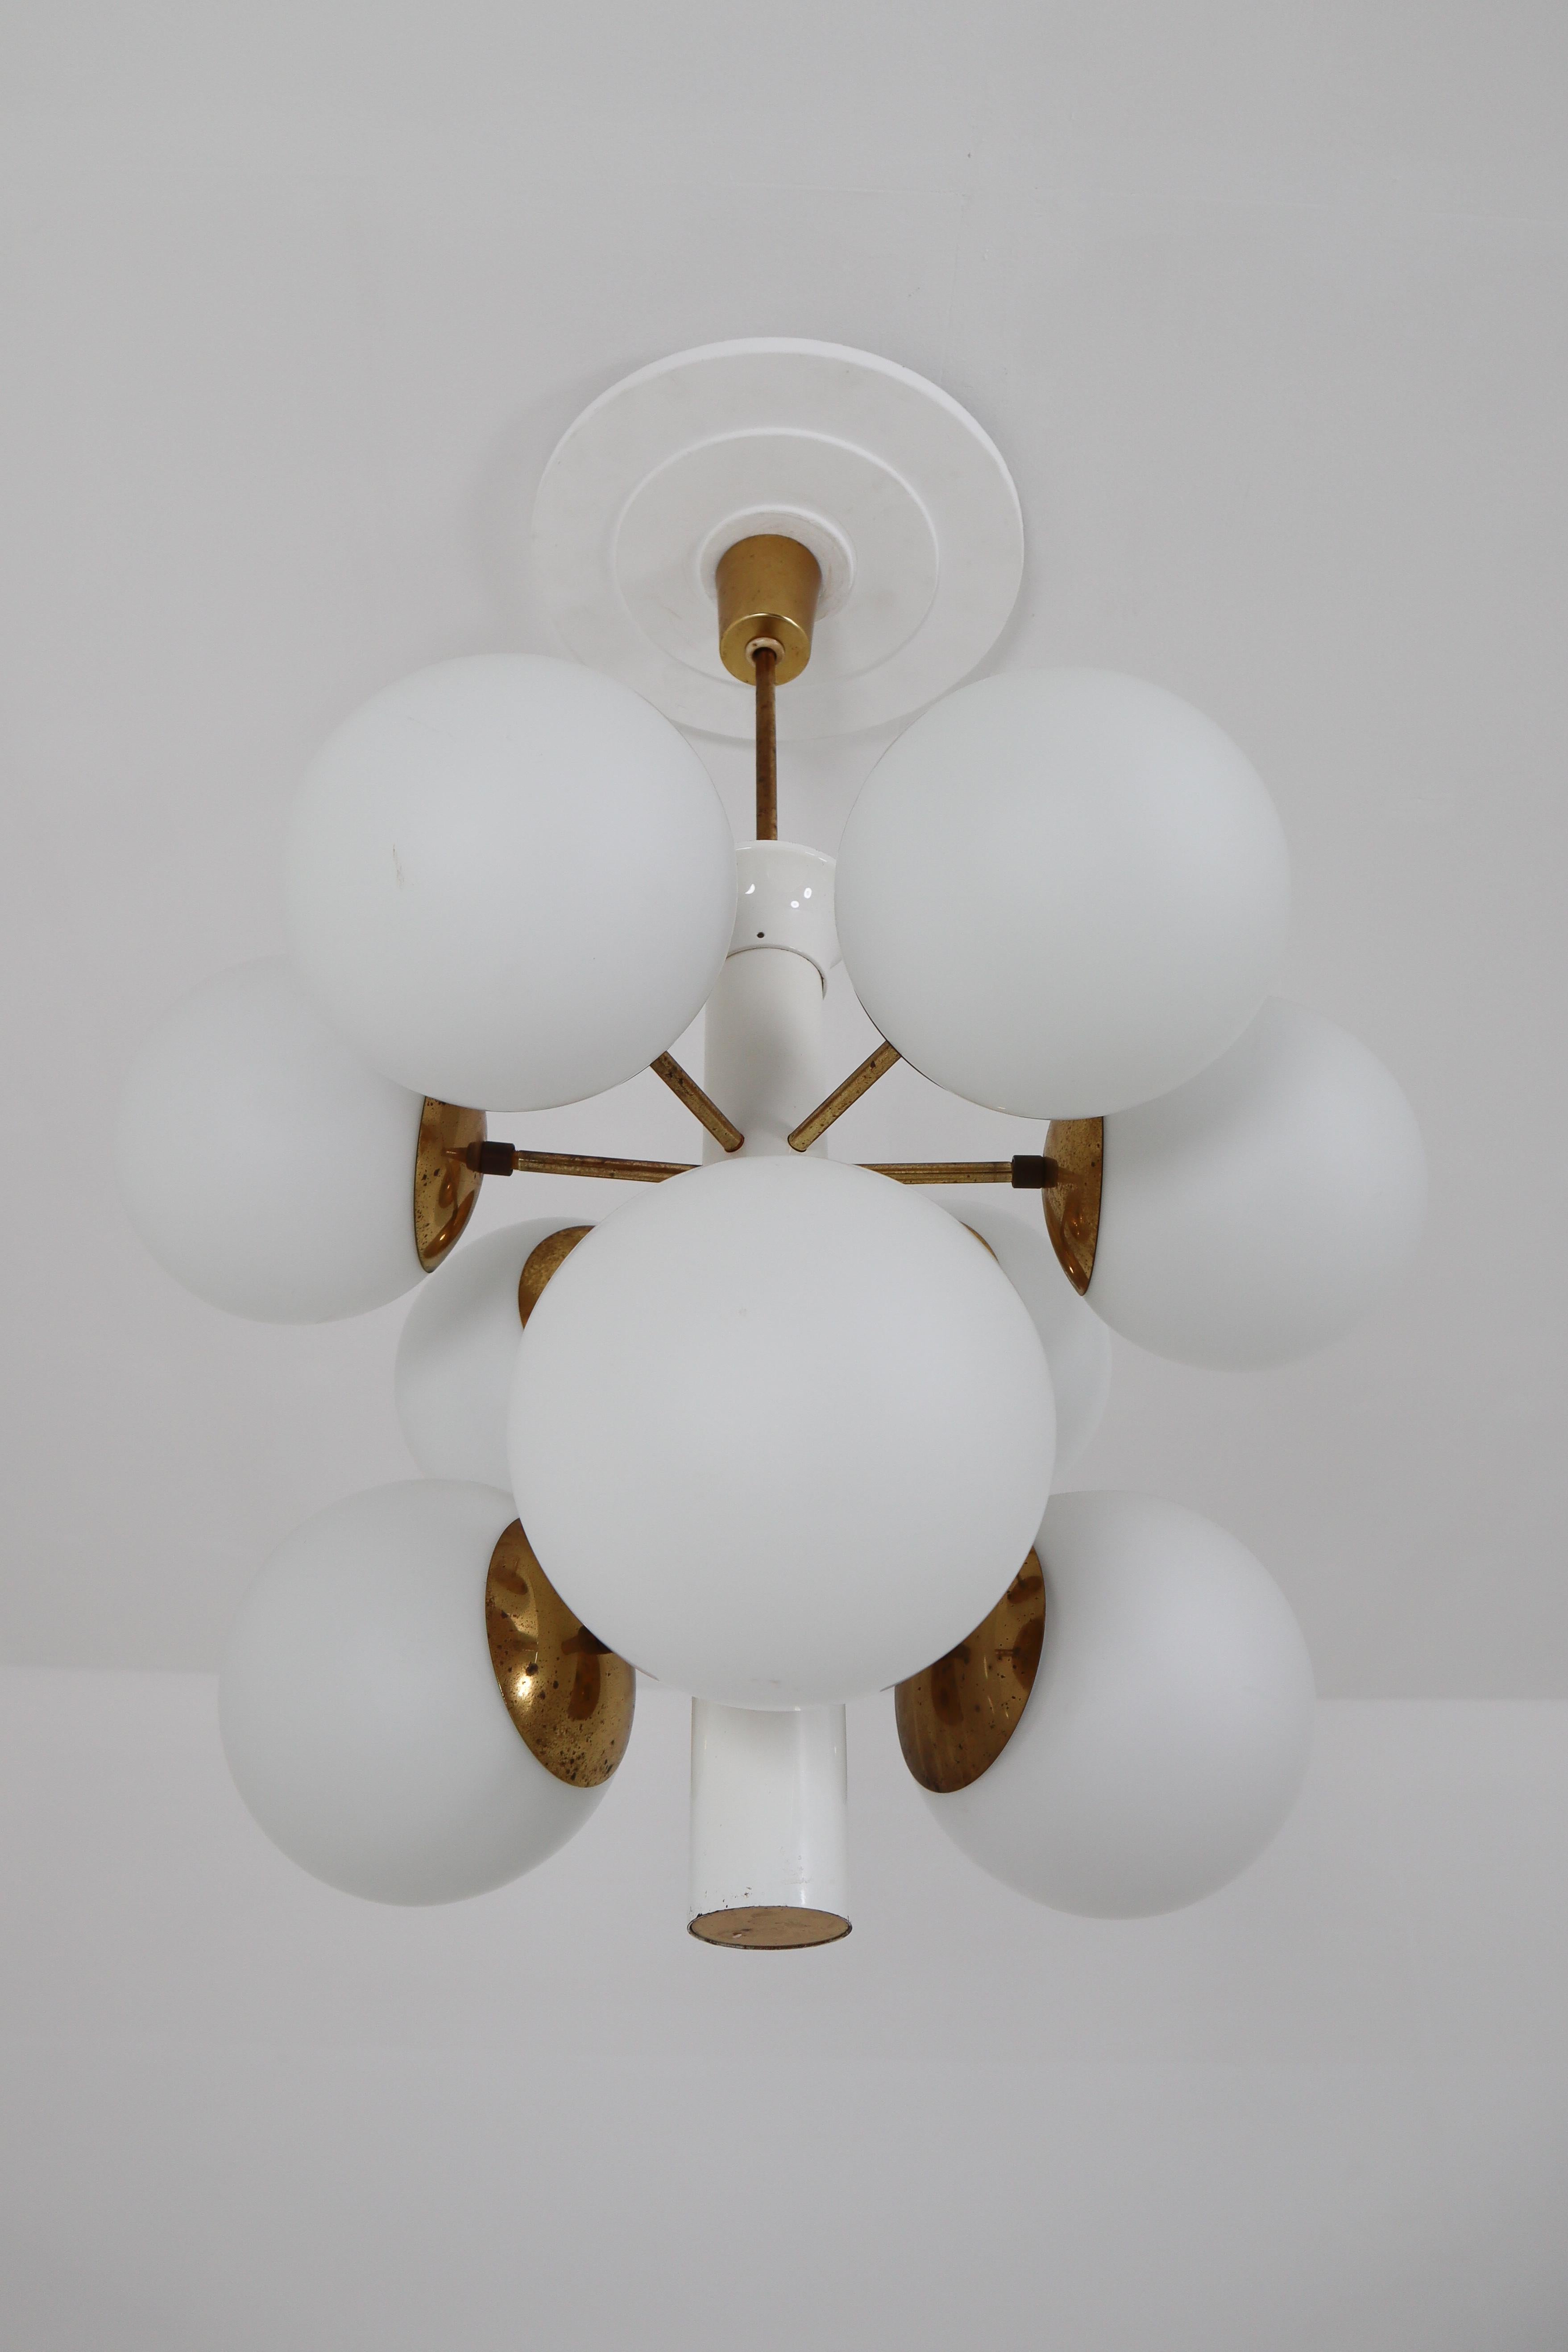 This fantastic midcentury Sputnik chandelier was designed in Germany 1960s featuring a patinated brass frame and nine handblown opal glass globes.